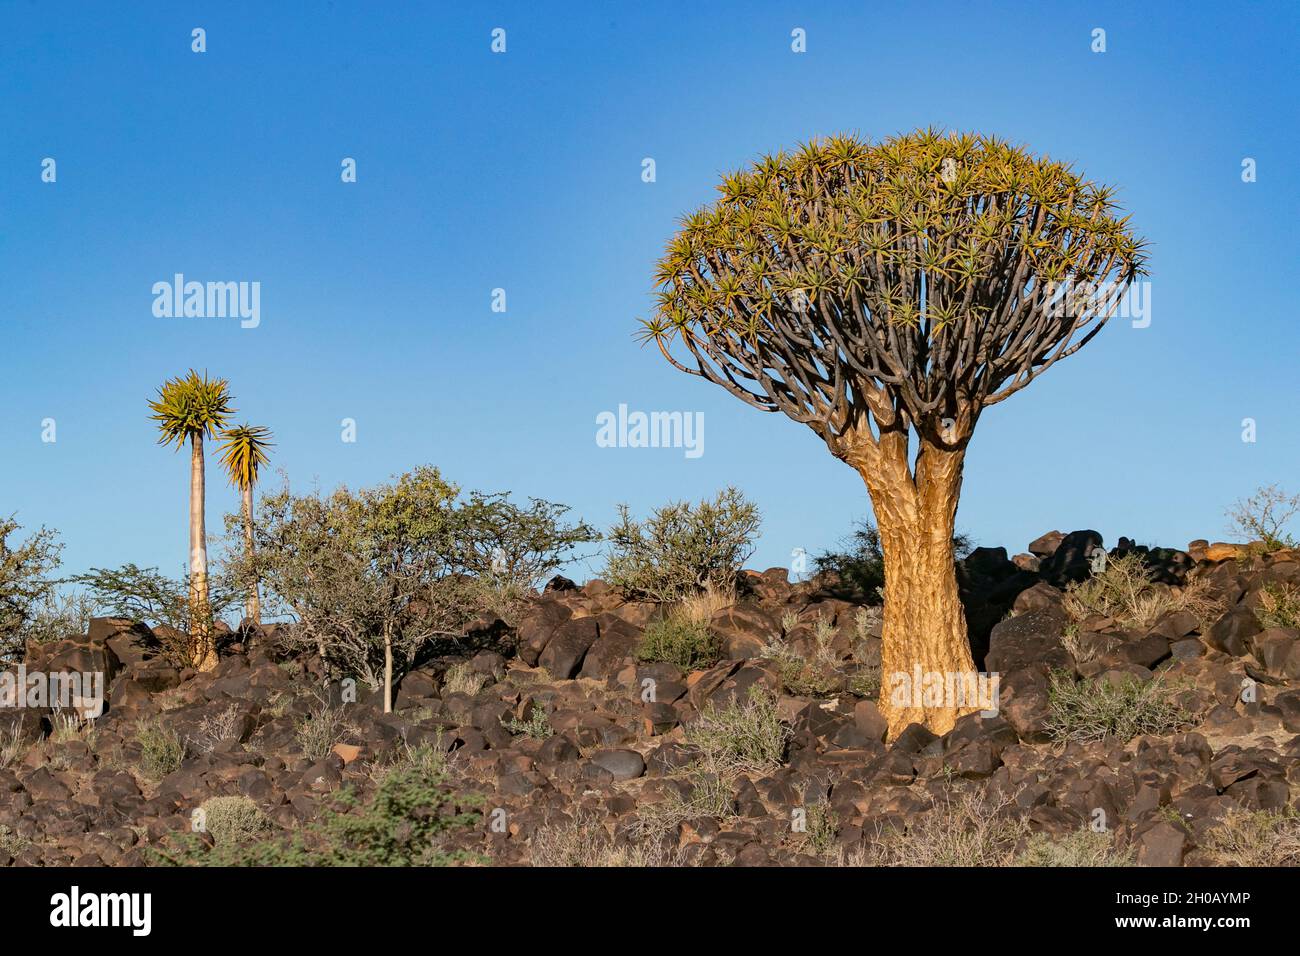 Quivertree forest or quiver tree (Aloidendron dichotomum), Gariganus farm, Keetmanshoop, Karas region, Namibia, Africa Stock Photo